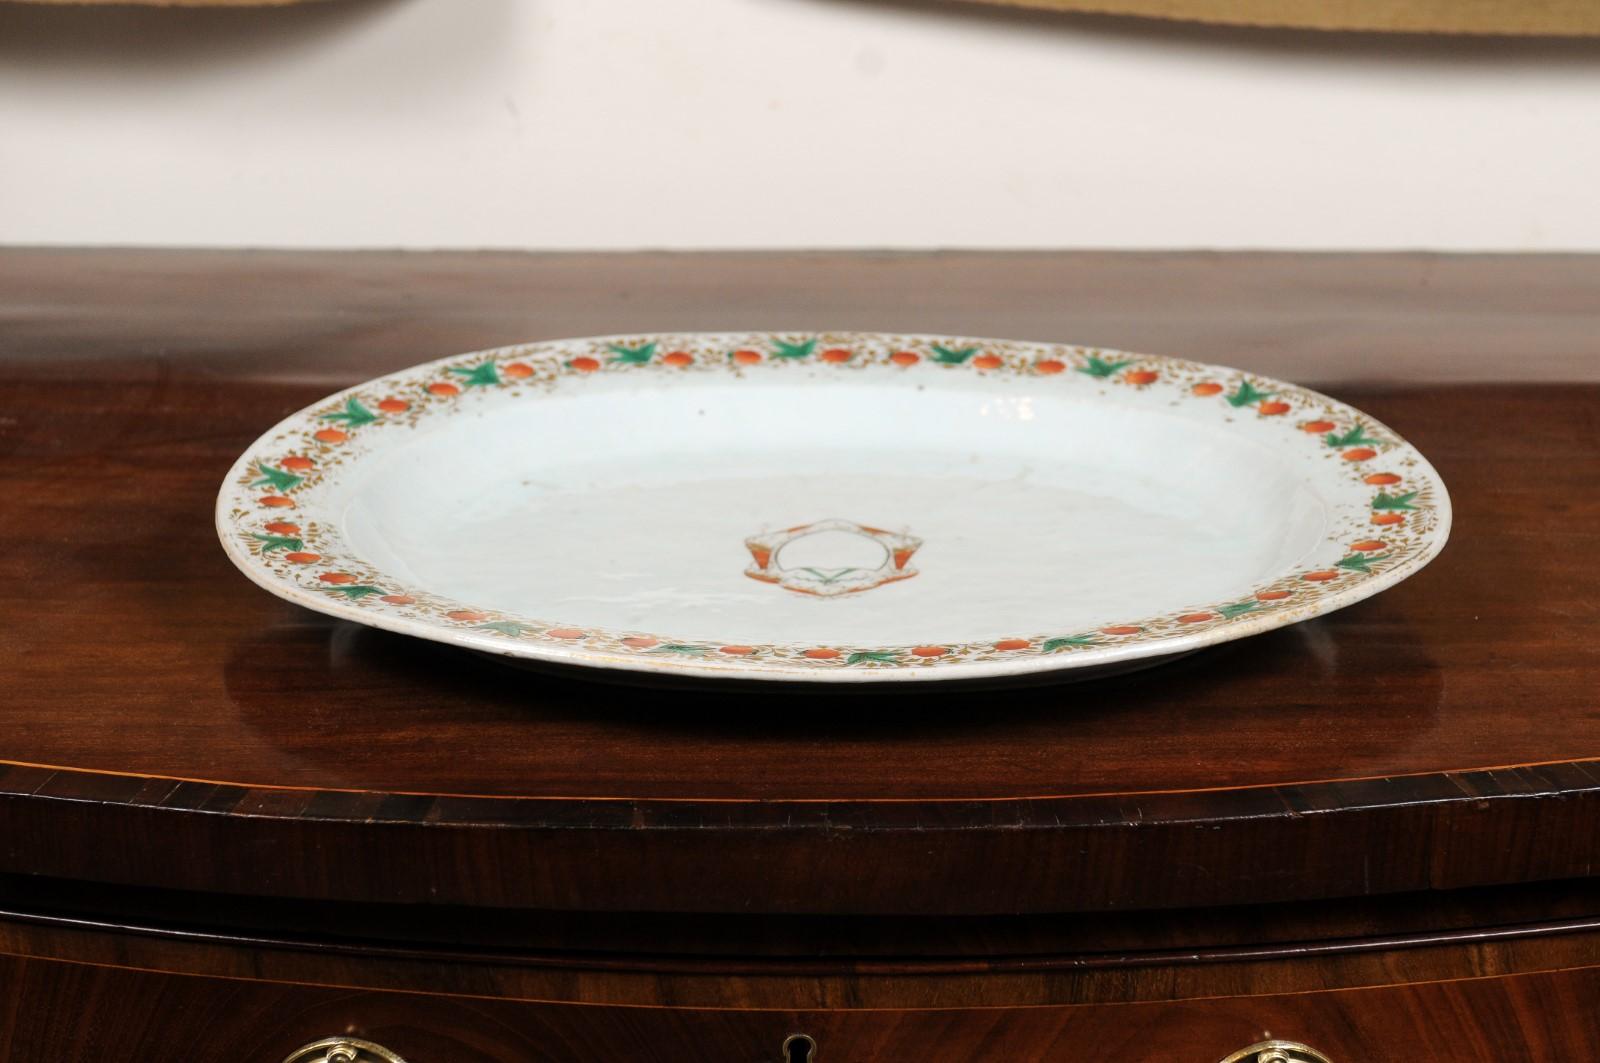 Chinese Export Armorial Porcelain Platter with Strawberry Pattern, 19th Century For Sale 11